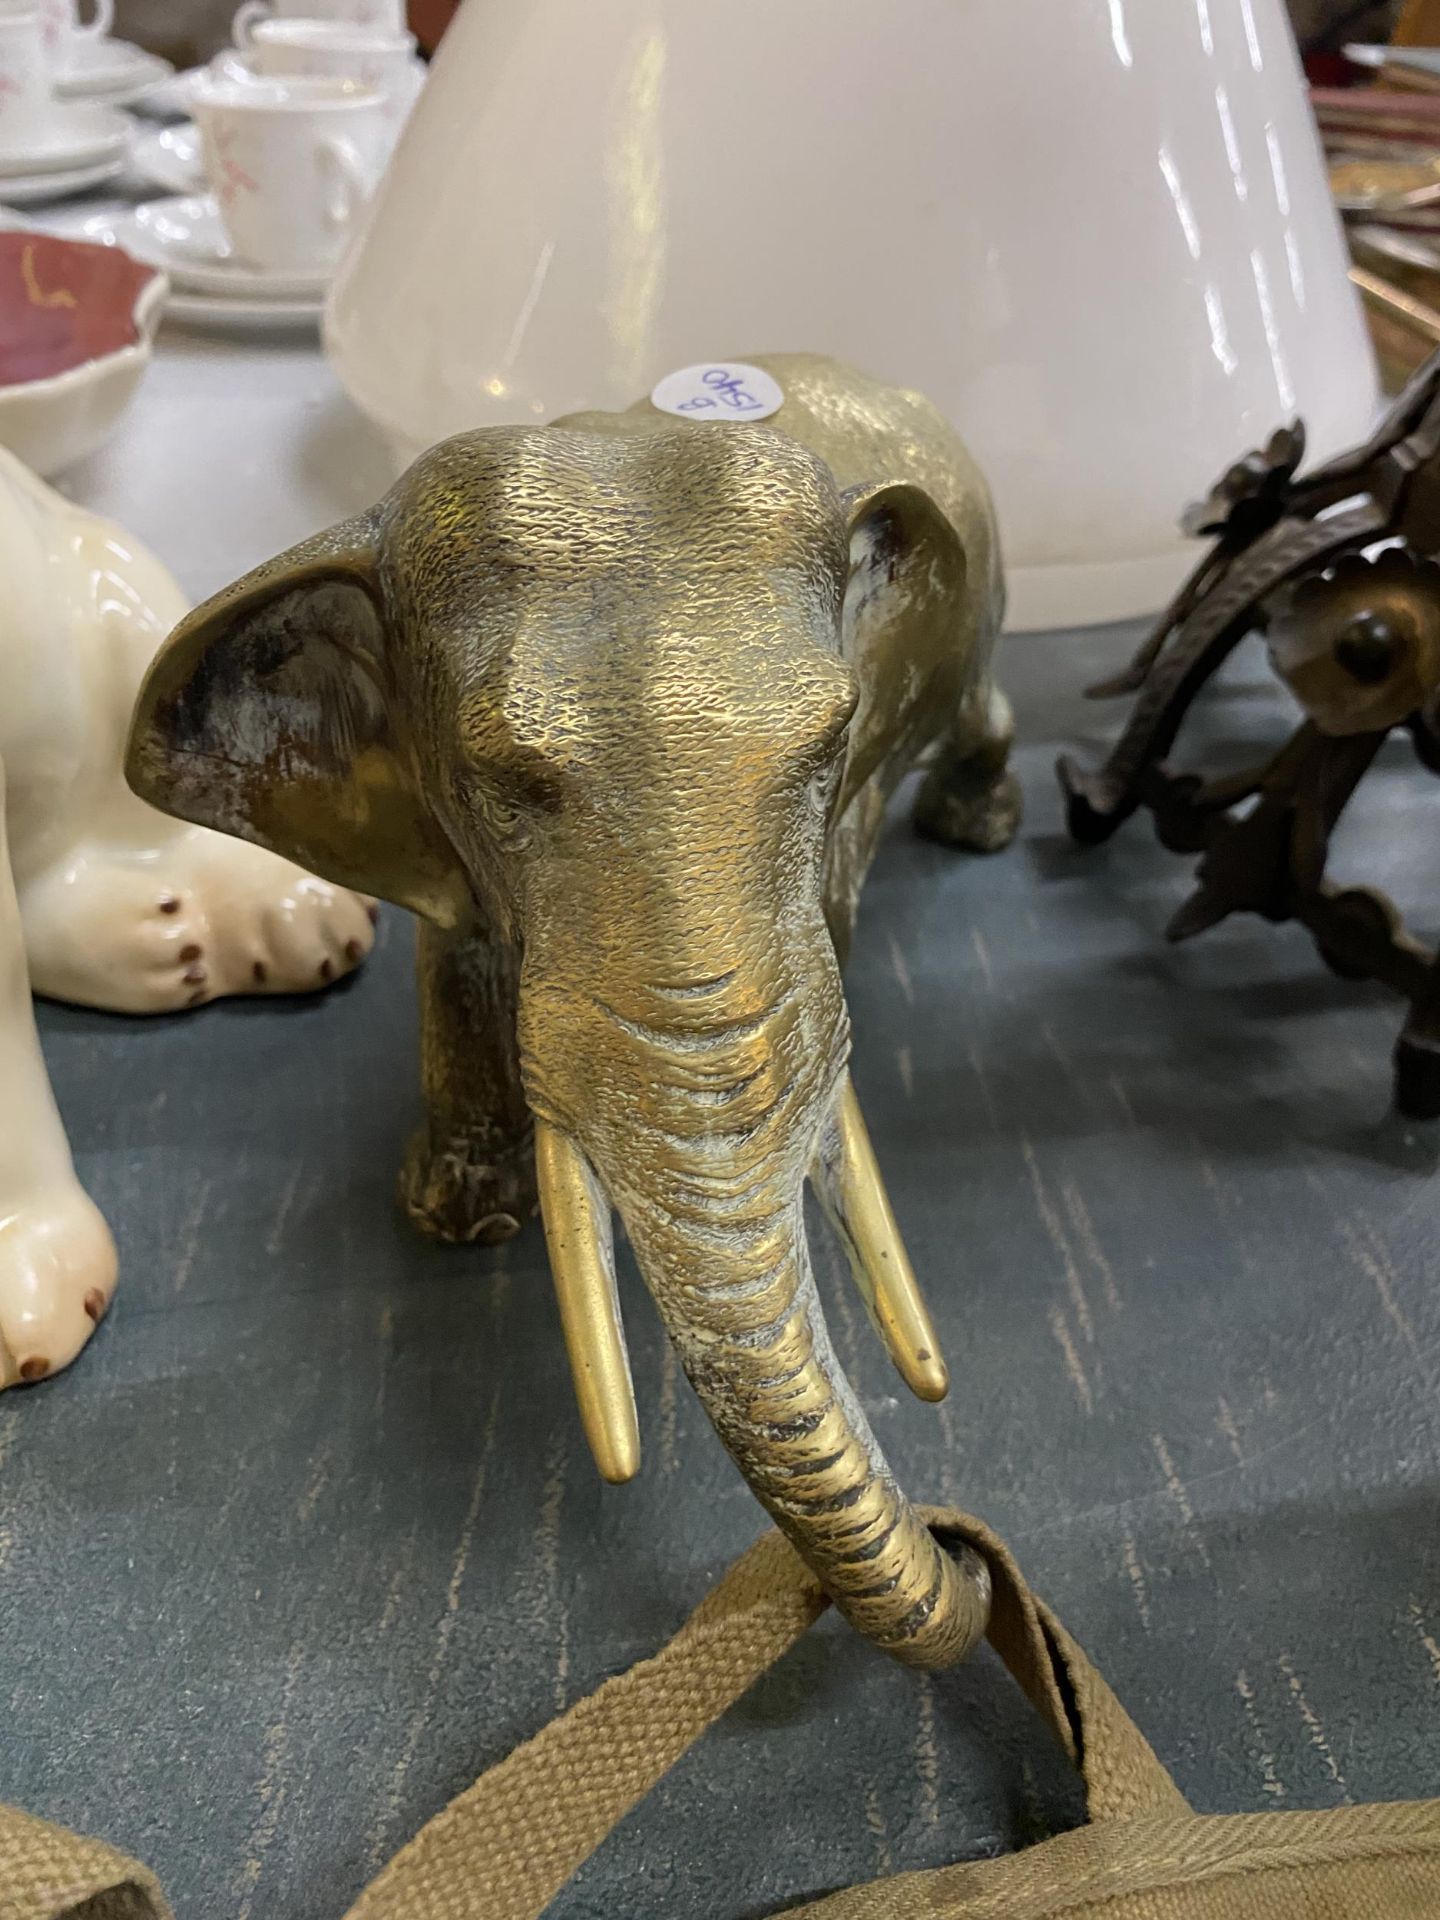 TWO ITEMS - A VINTAGE BRASS ELEPHANT & CATS & CO CERAMIC DOG FIGURE - Image 3 of 3